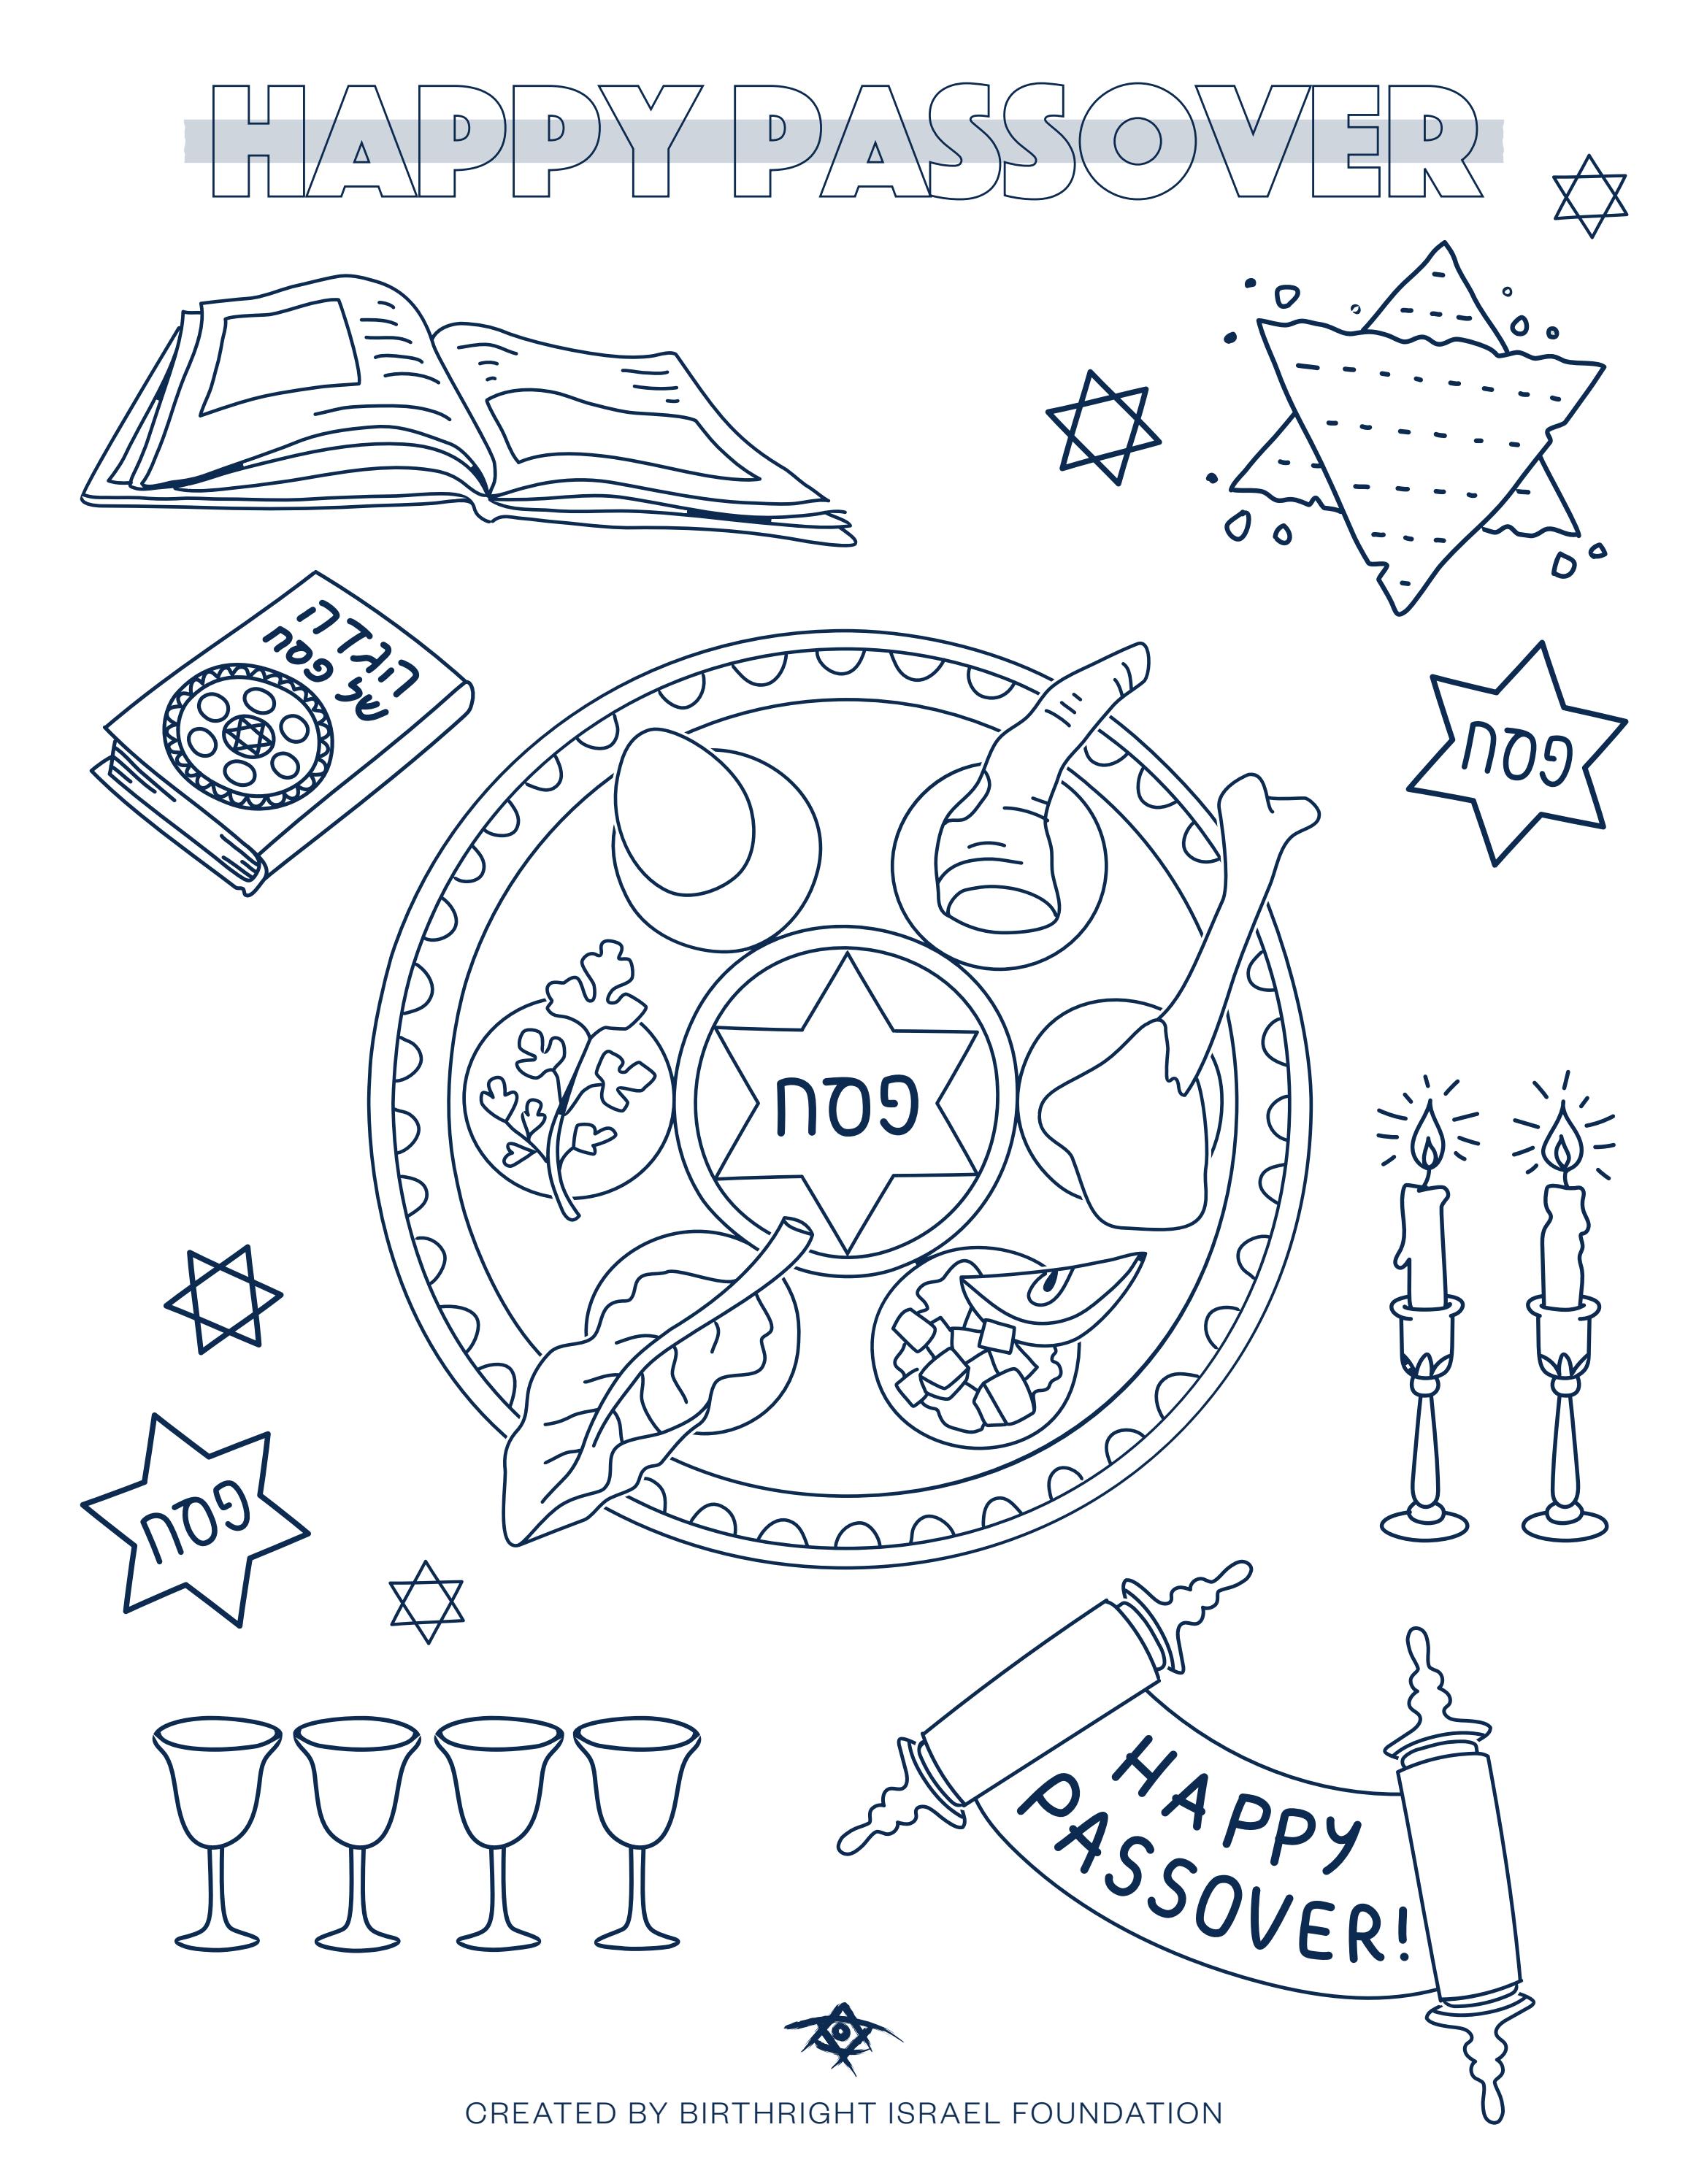 Passover coloring pages by birthright israel foundation